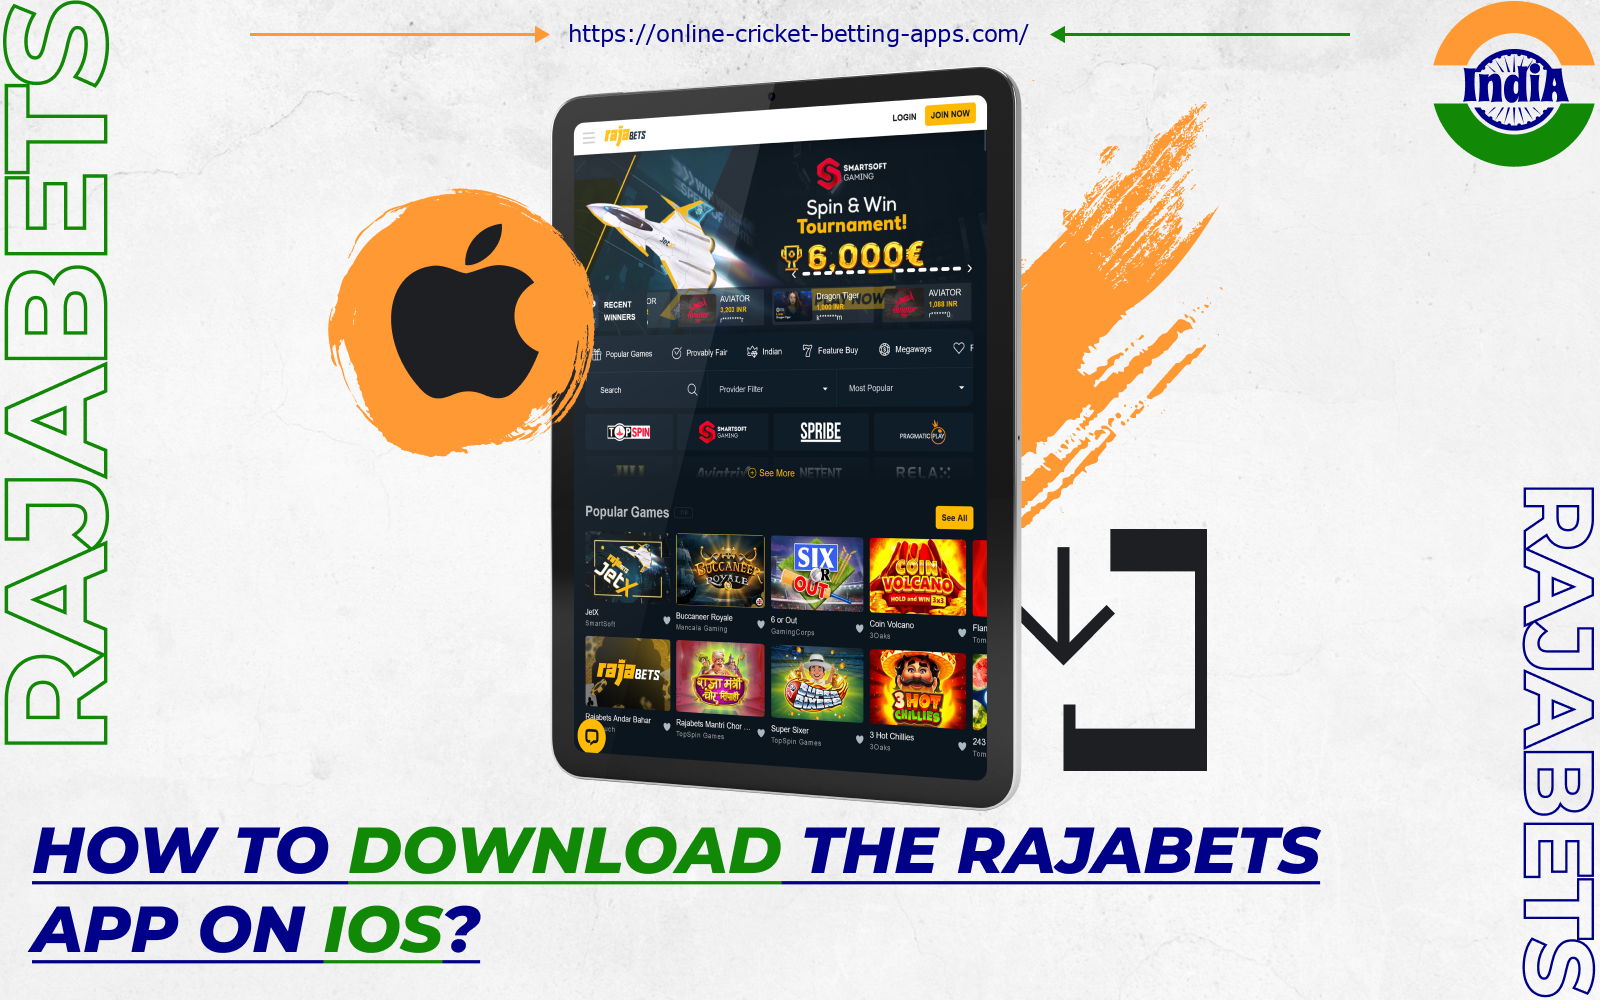 After downloading the Rajabets app for Apple devices, Indian bettors will be able to play casino games and bet on cricket